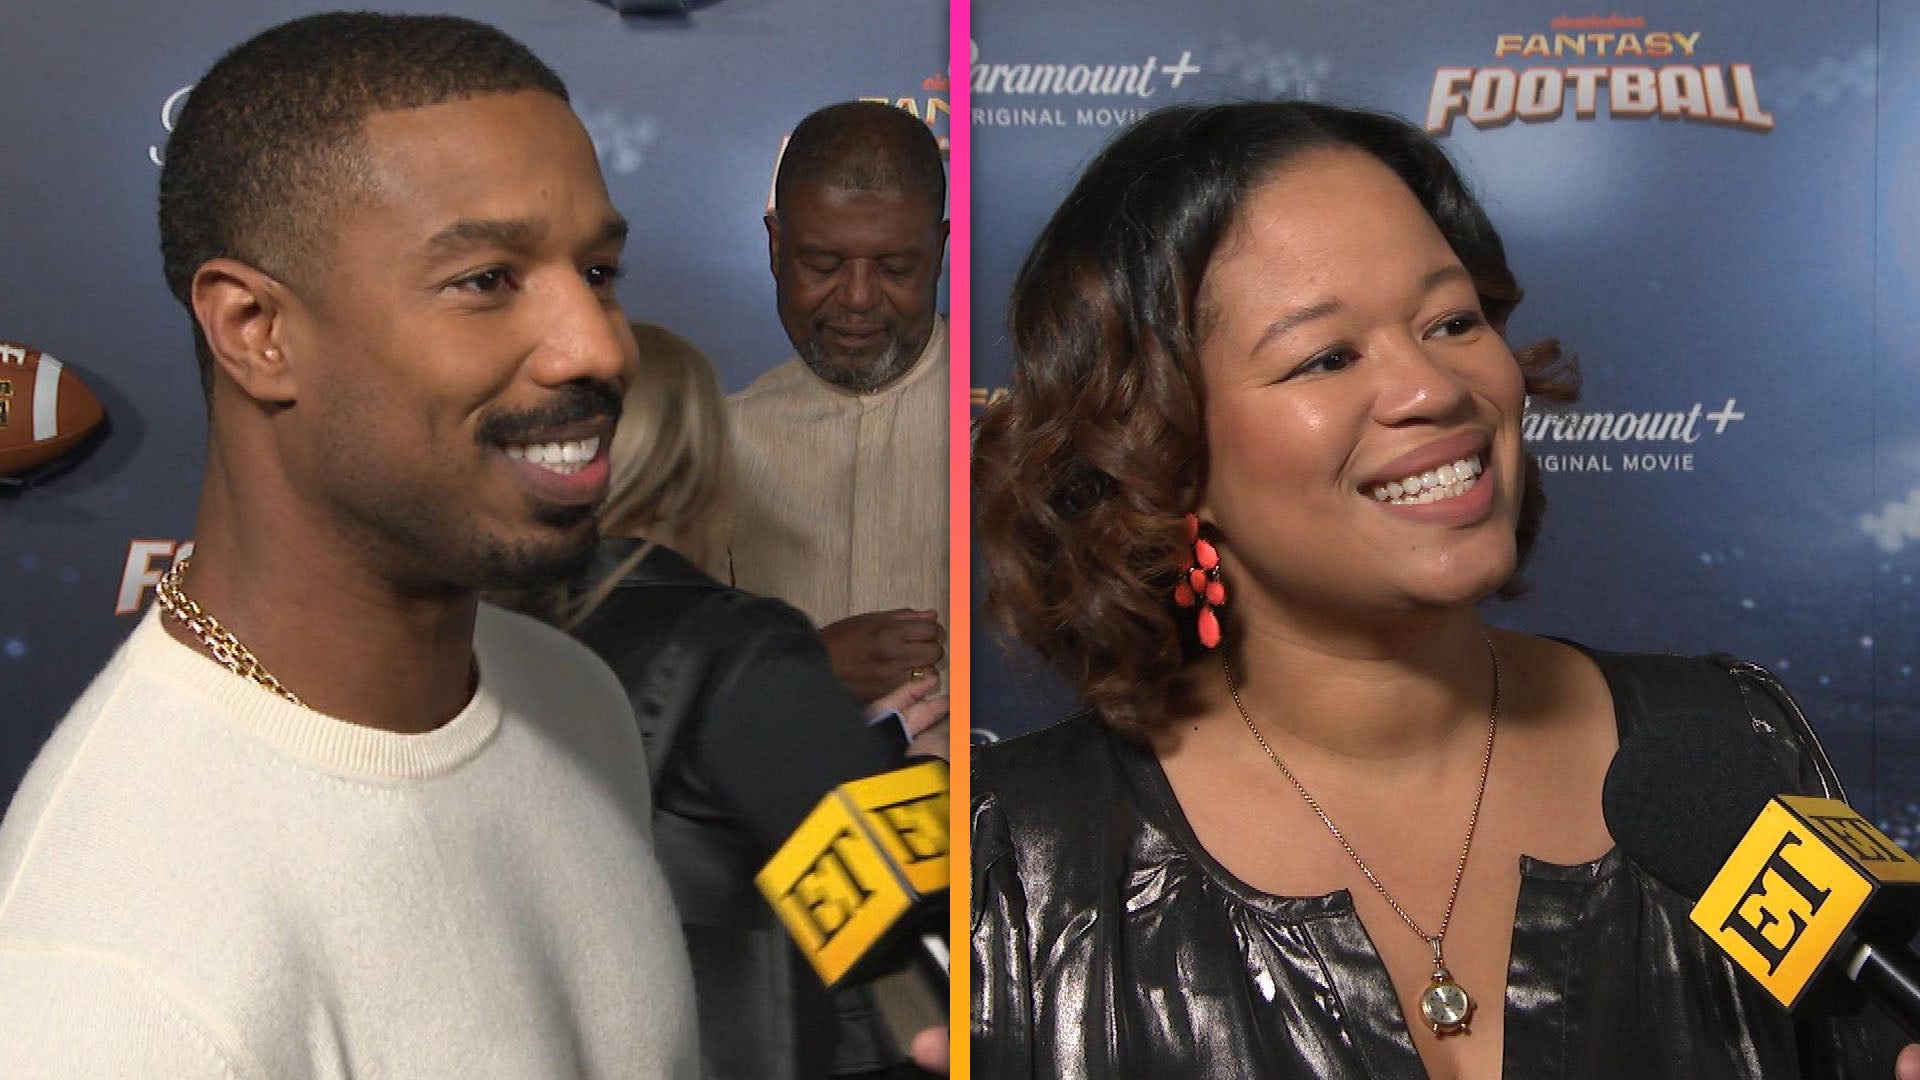 Michael B. Jordan Is ‘Extremely Proud’ of His Sister’s New Movie ‘Fantasy Football’ (Exclusive) 